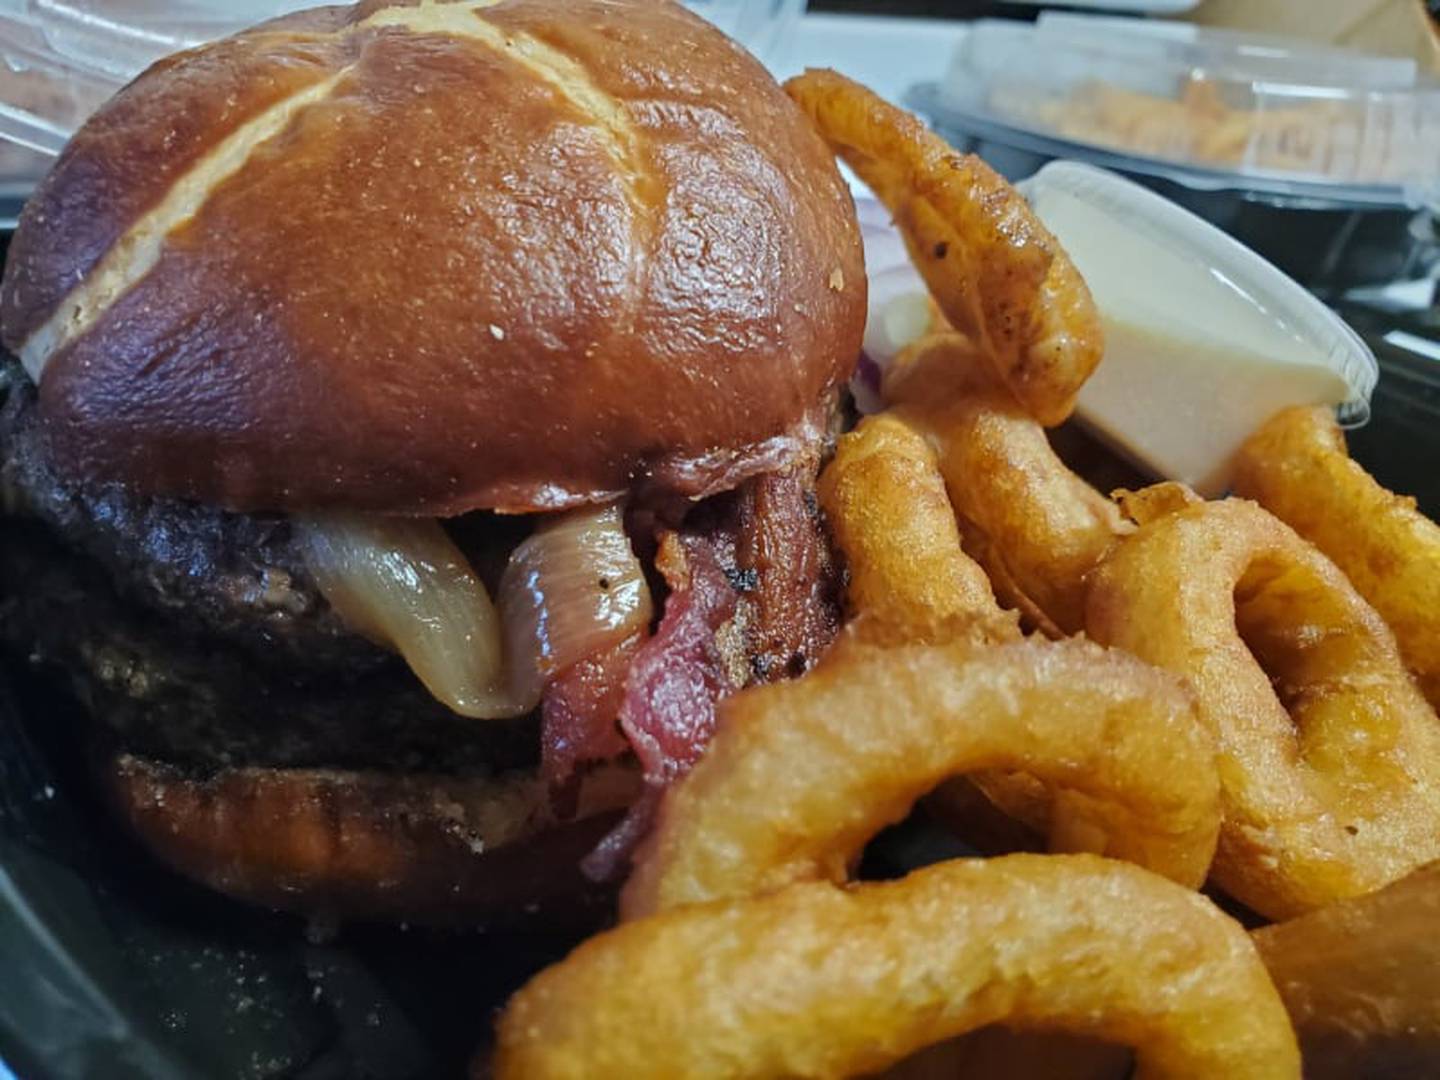 Jameson's Pub offers a Jameson’s Burger with bacon for $26. I ordered medium and it arrived a perfect medium. I swapped the nun for a pretzel bun for $2 which is what I received. I chose onions rings ($2) for the side. The portions were generous (and delicious).